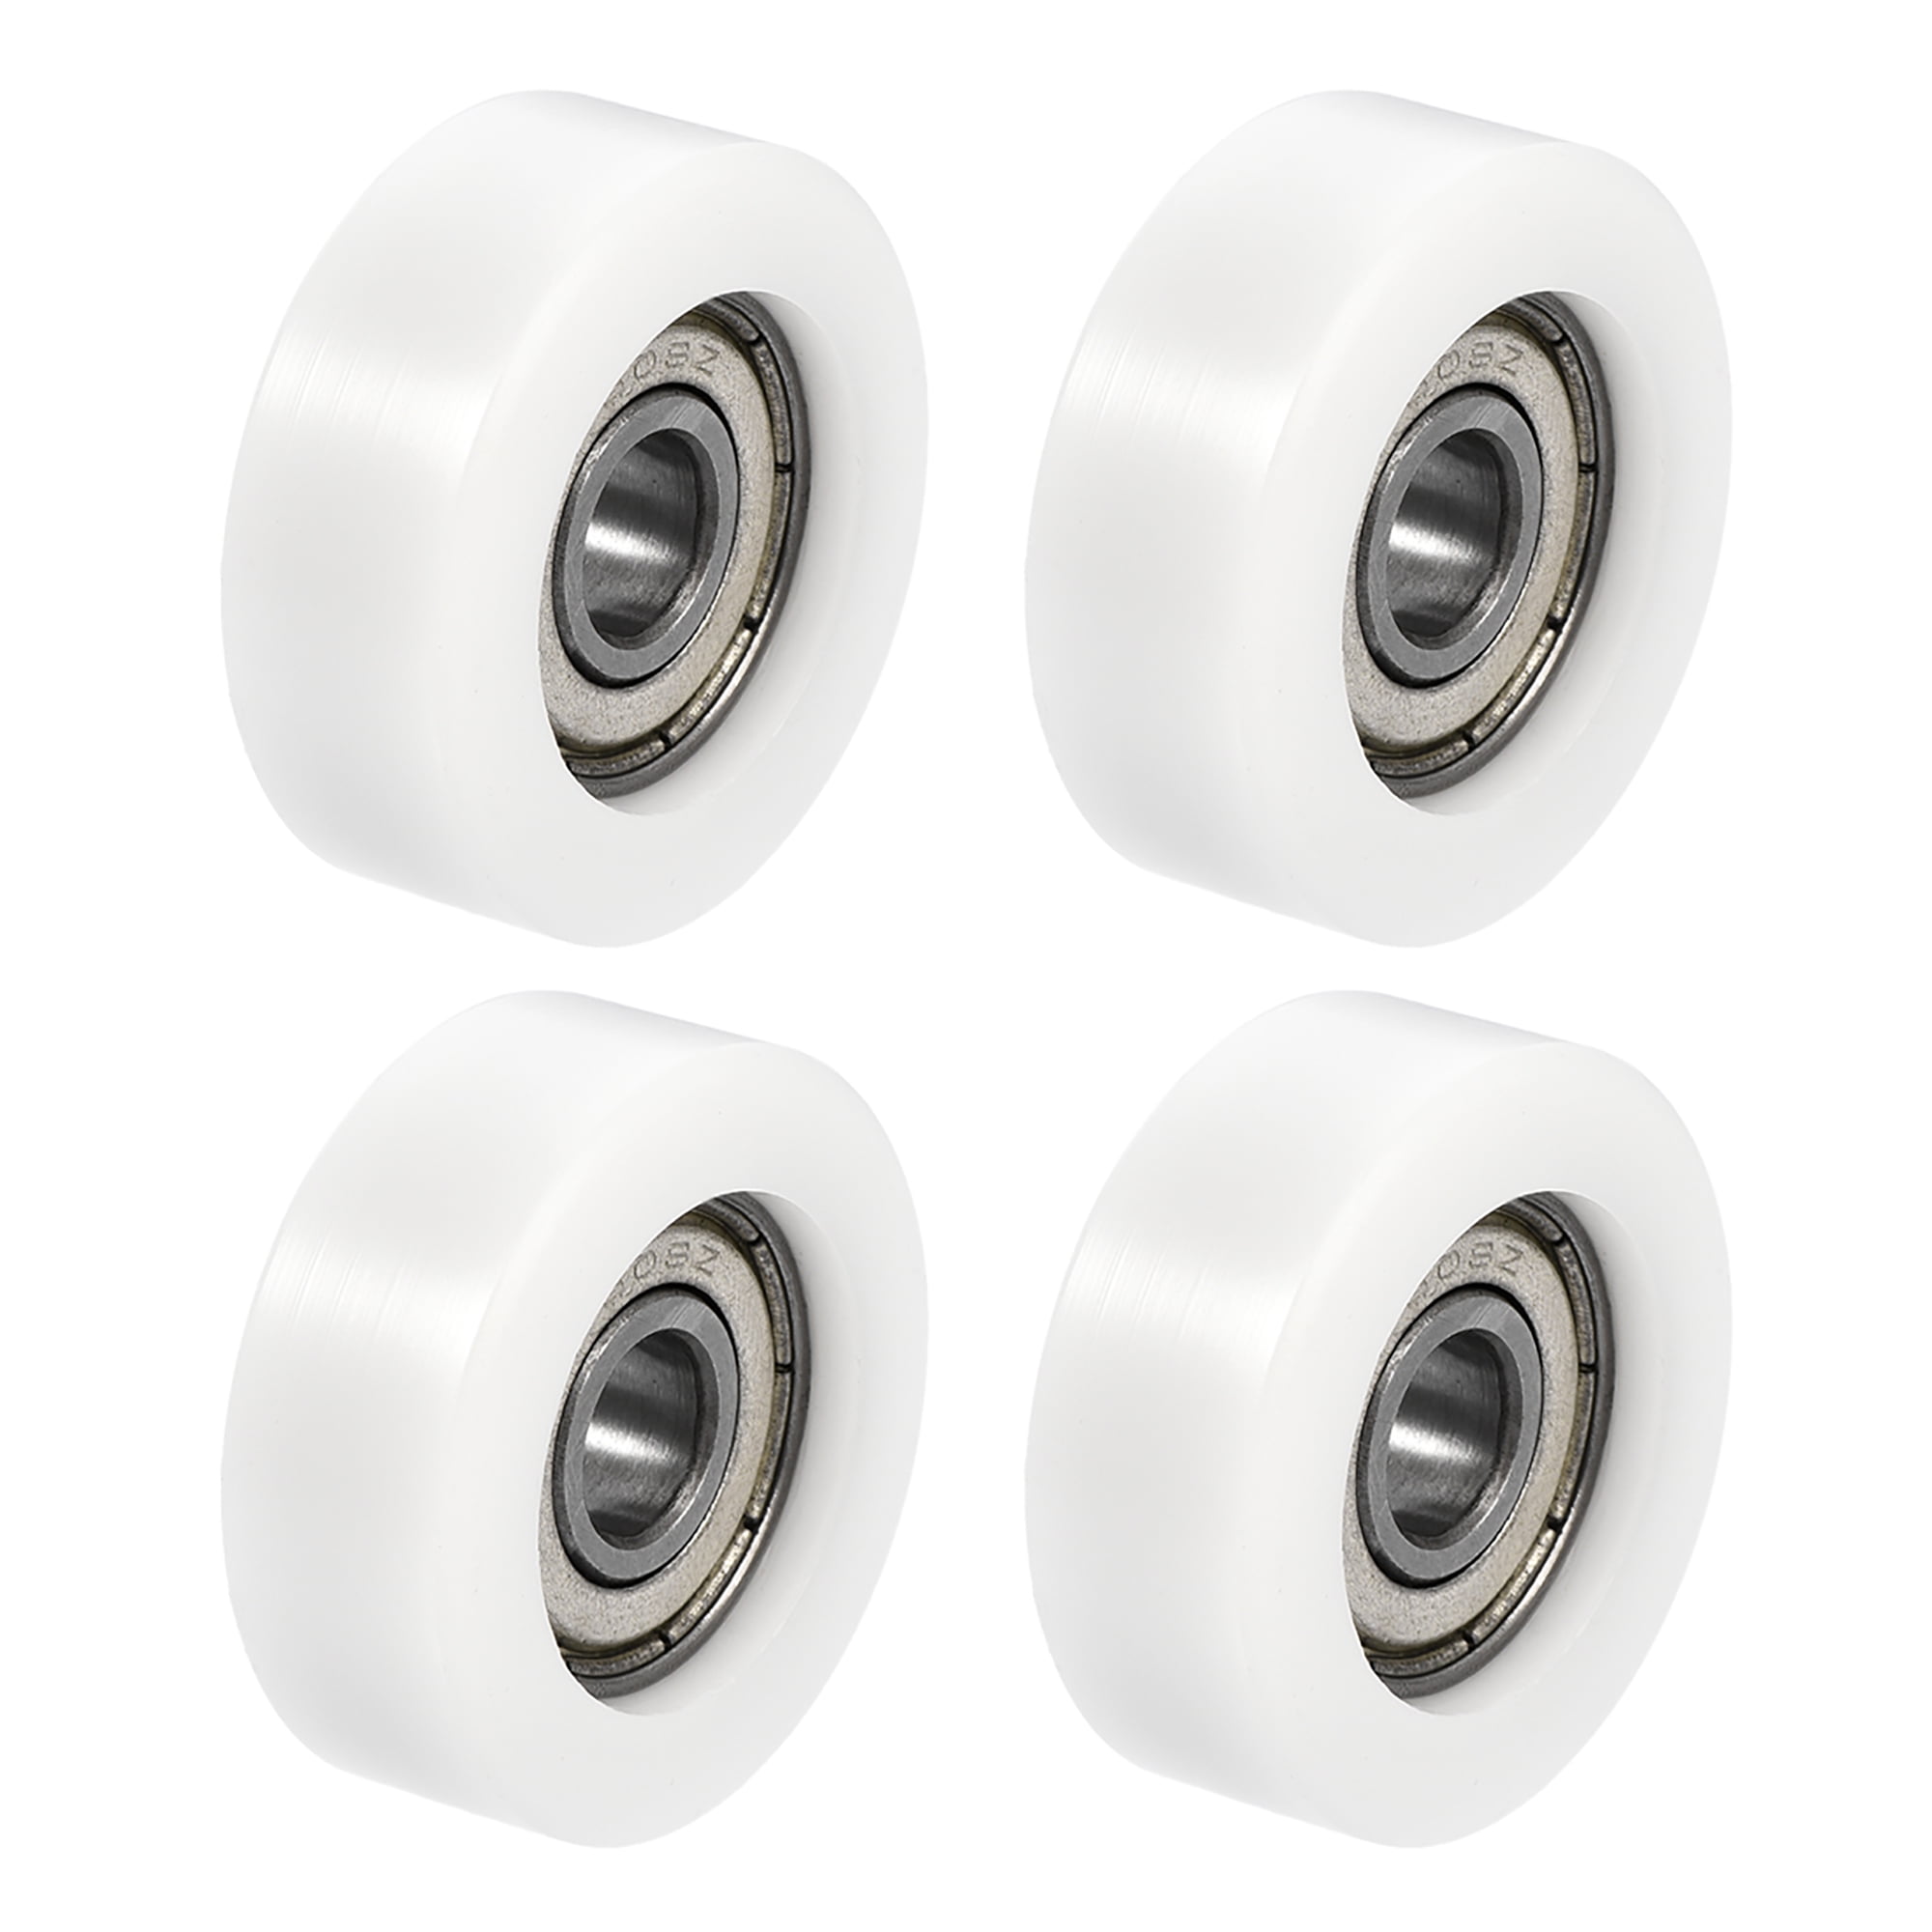 GCr15 uxcell 608ZZ Ball Bearing Guide Pulley Roller Round Wheel 8x32x12mm Double Metal Shielded Chrome Steel Bearings 4pcs 